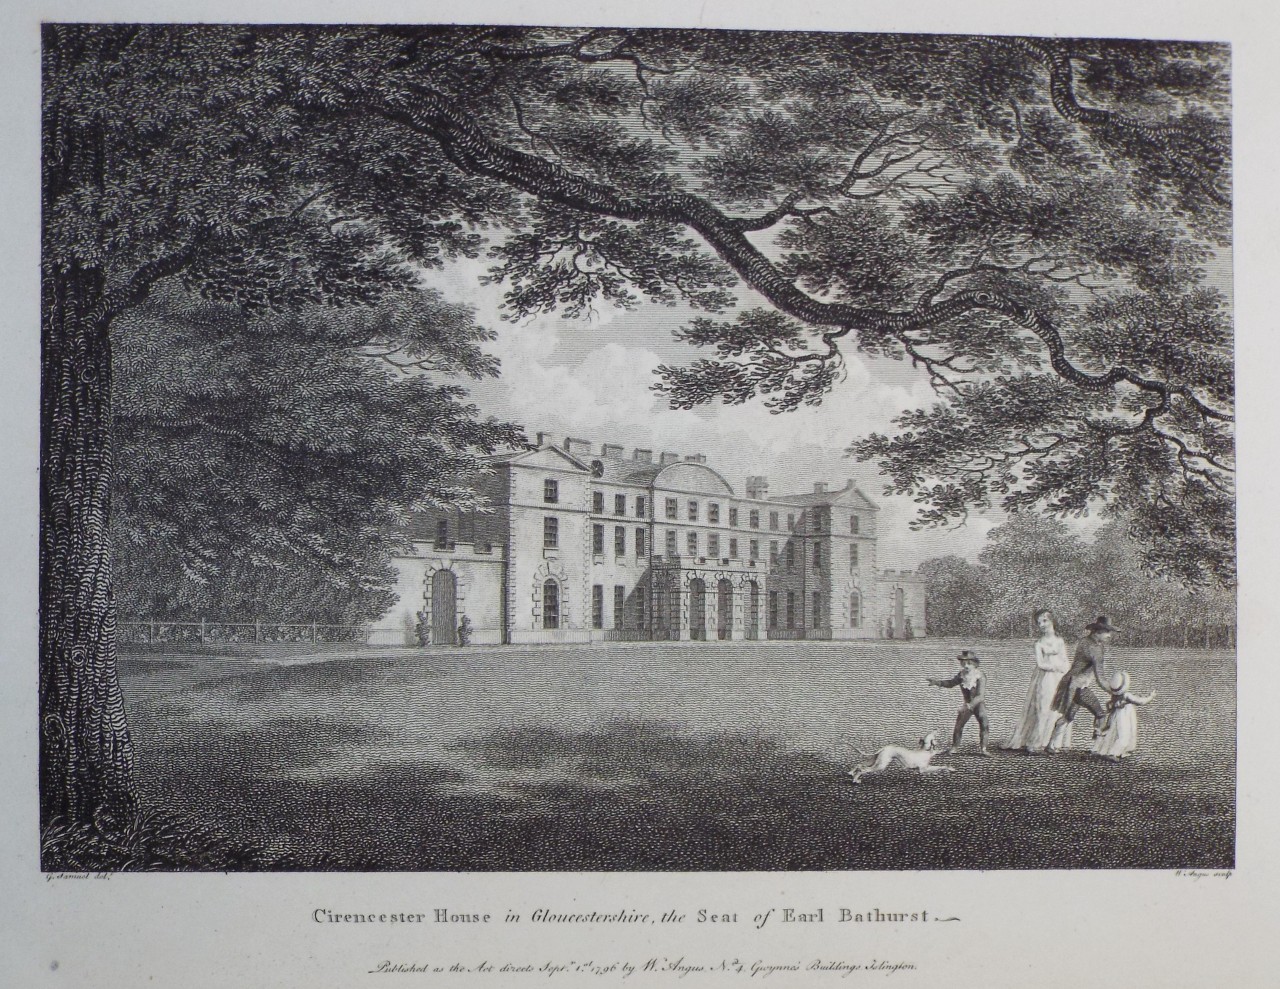 Print - Cirencester House in Gloucestershire, the Seat of Earl Bathurst. - Angus